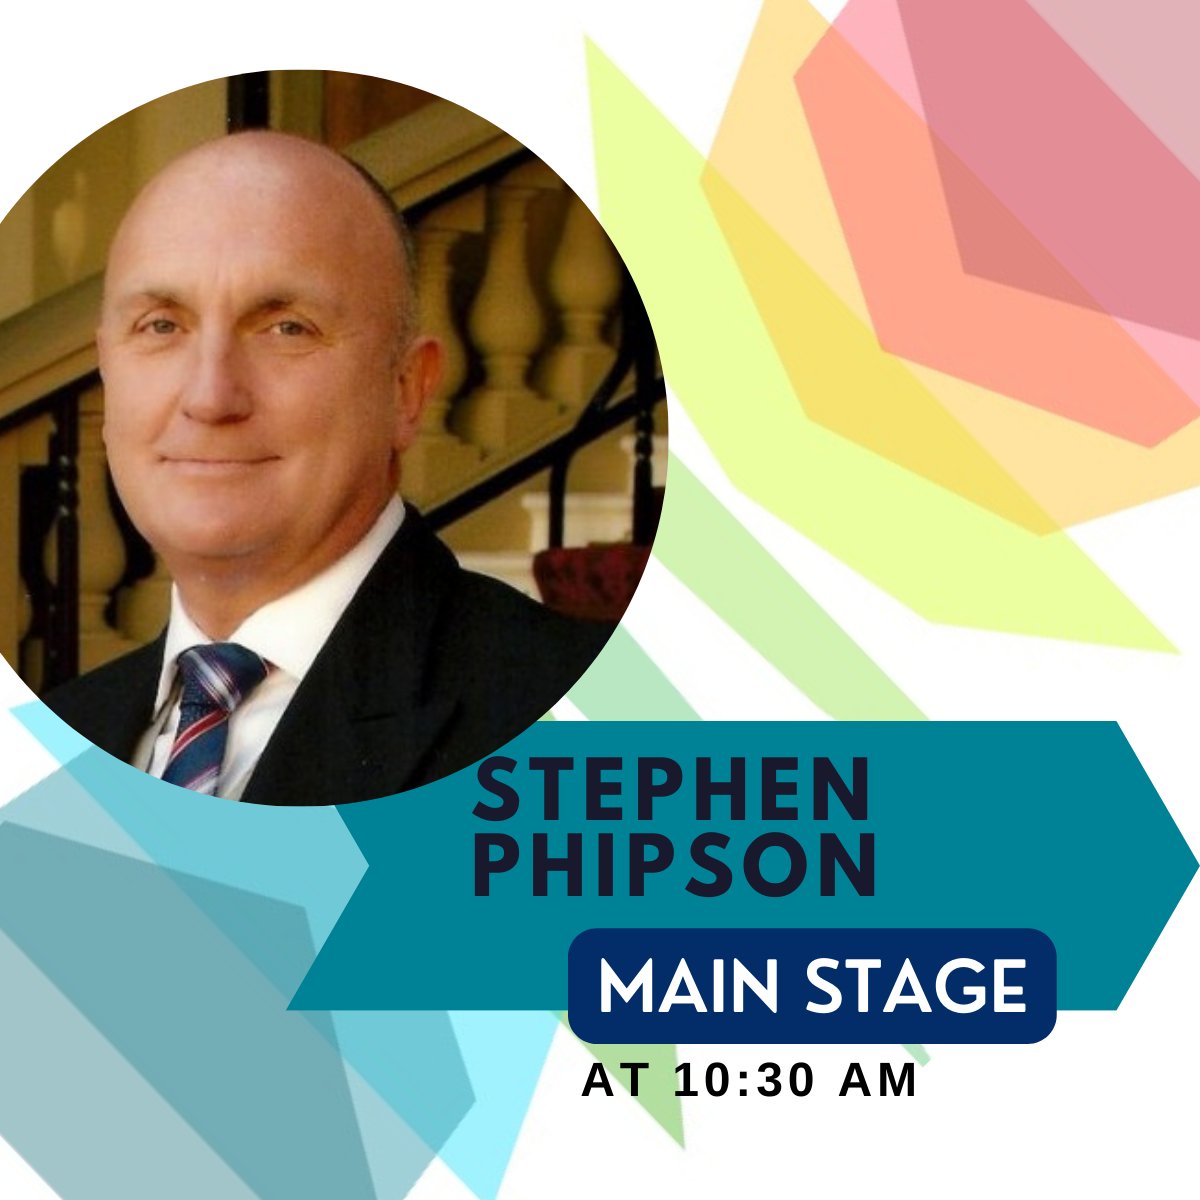 Exciting Morning Ahead! Join us on the Main Stage in 10 minutes for Stephen Phipson's 'State of the Nation' keynote presented by Make UK. Stay informed! #AEUK23 #EngineeringEvent #UKMFG